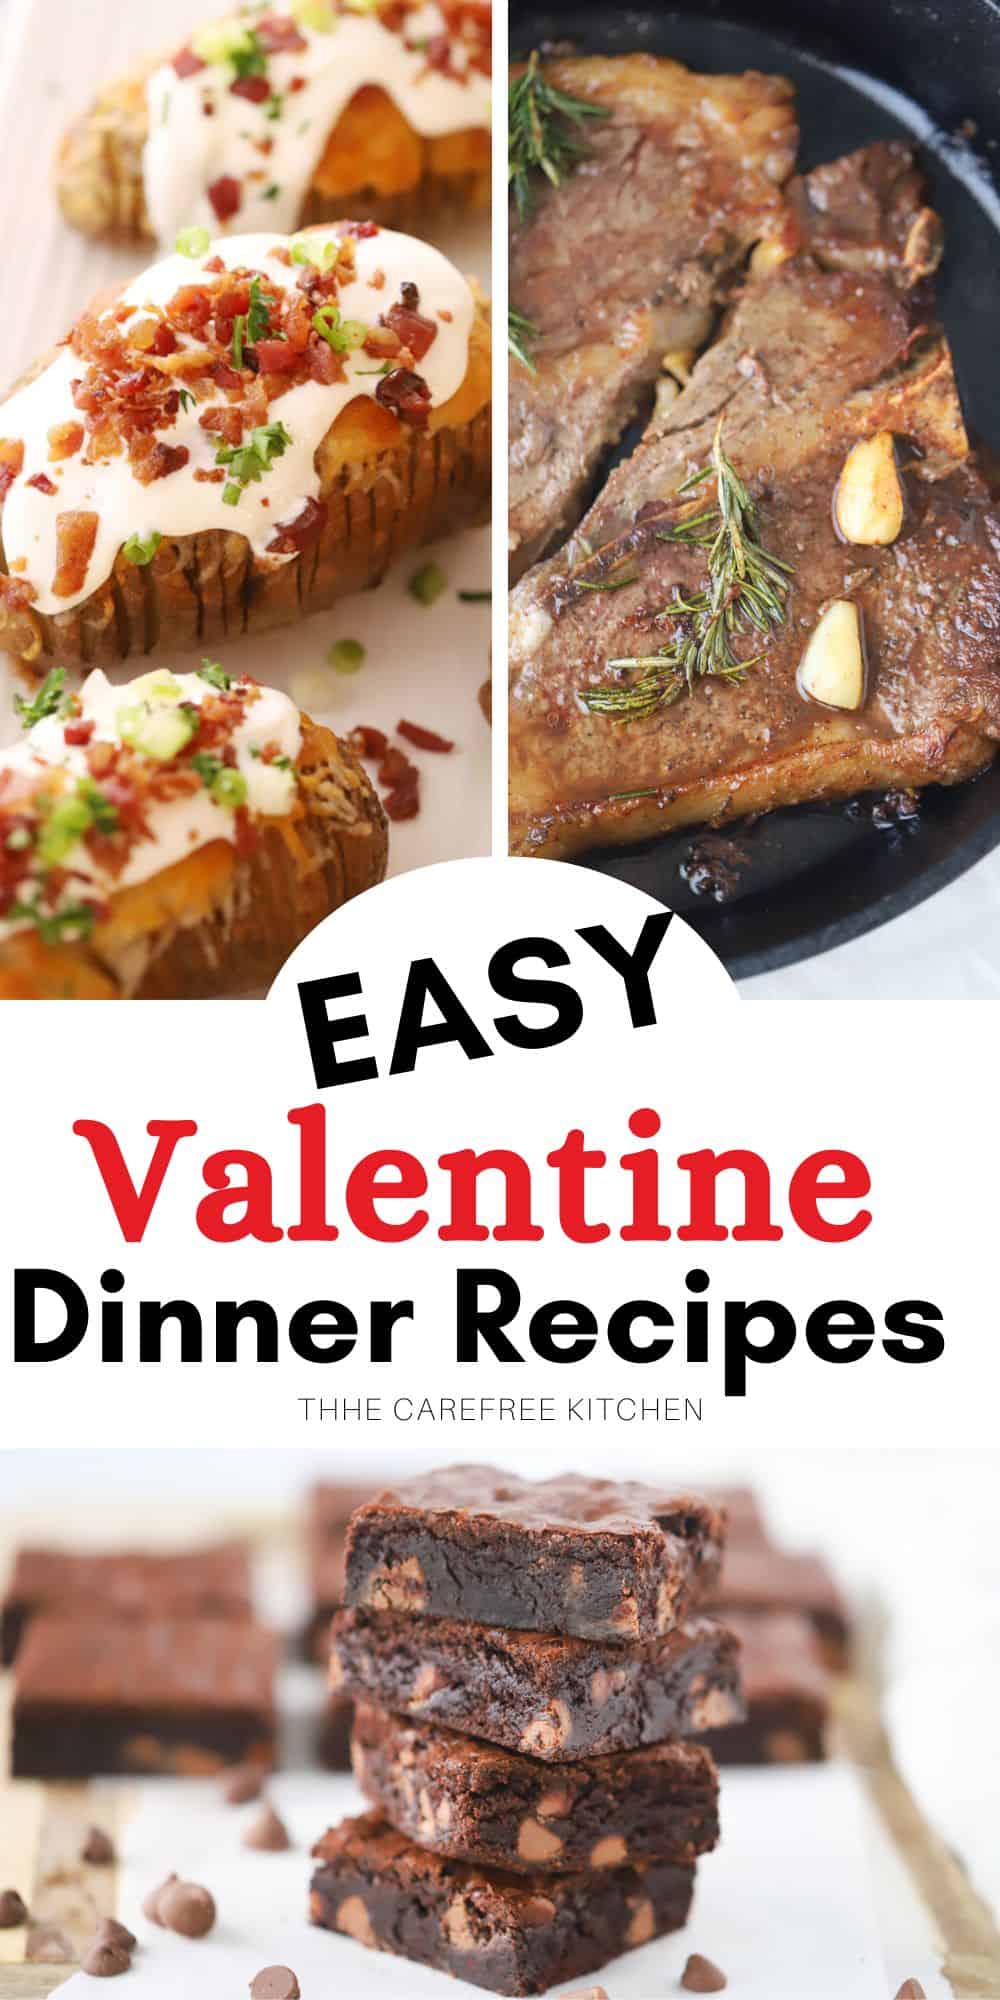 Valentines Day Meal Ideas - The Carefree Kitchen